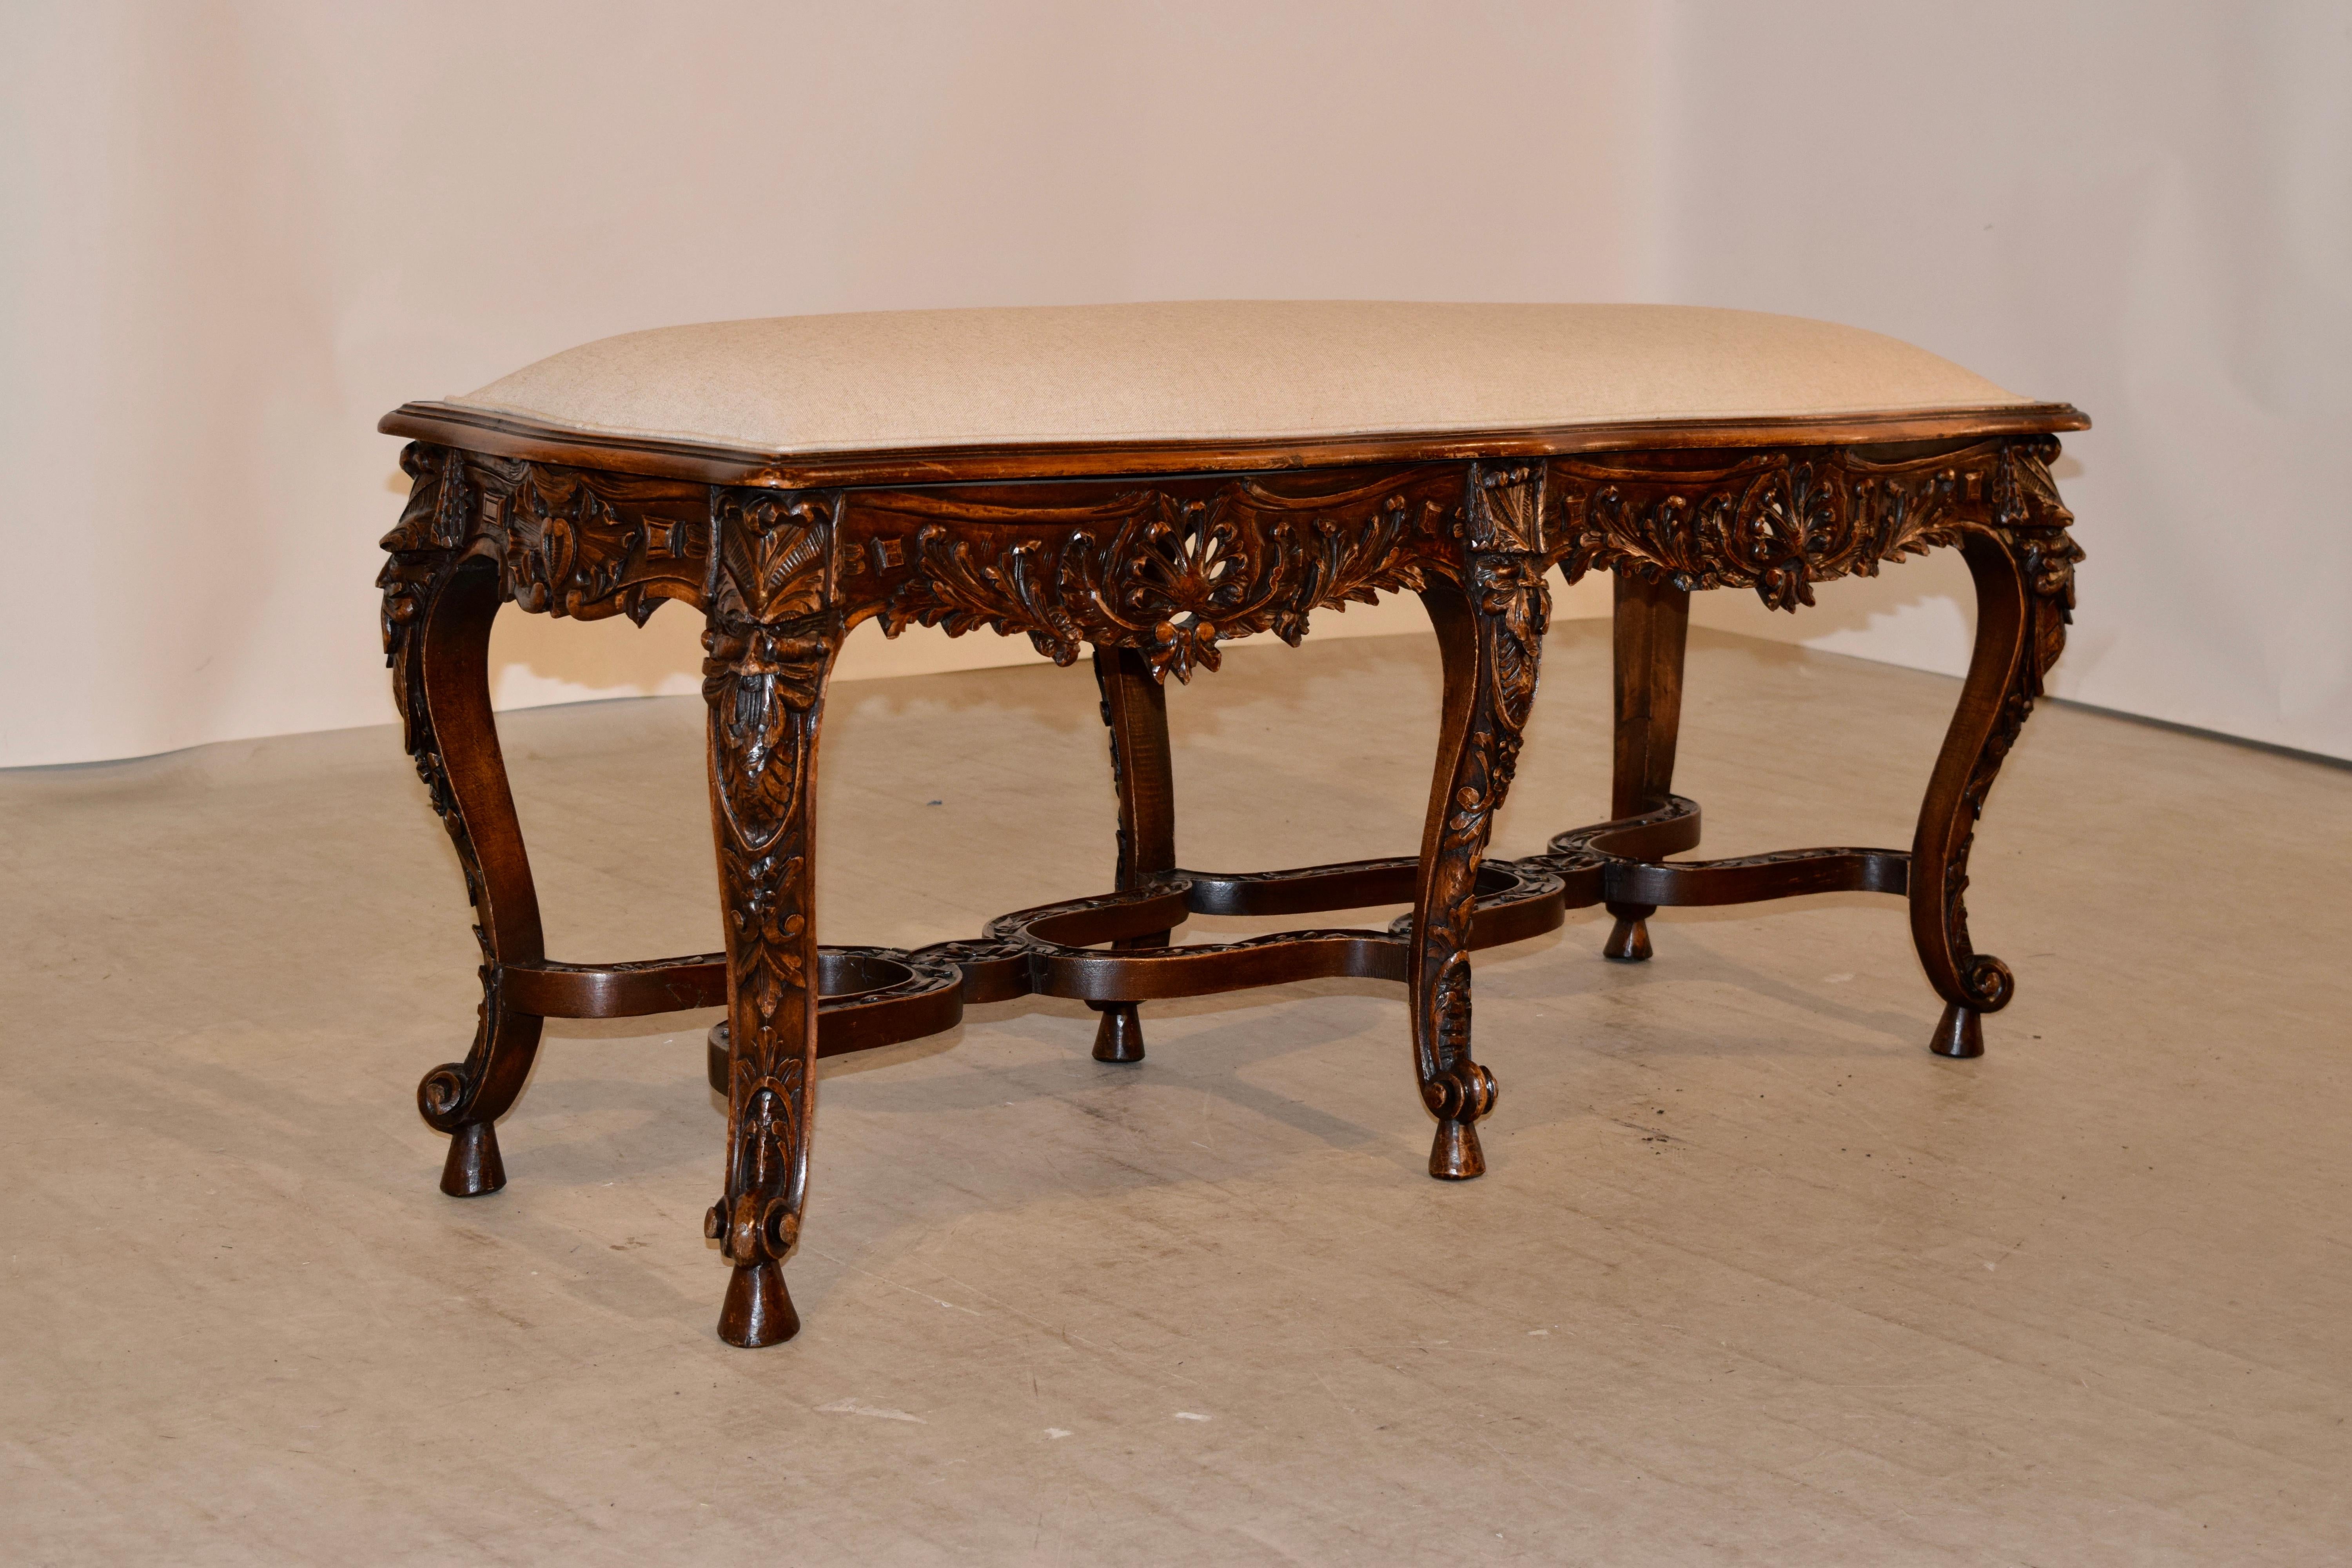 19th century carved walnut bench from France with a newly upholstered seat in linen and finished with welted decoration. The upholstered seat is scalloped and is enclosed in a molded and scalloped frame around the edge. This follows down to a